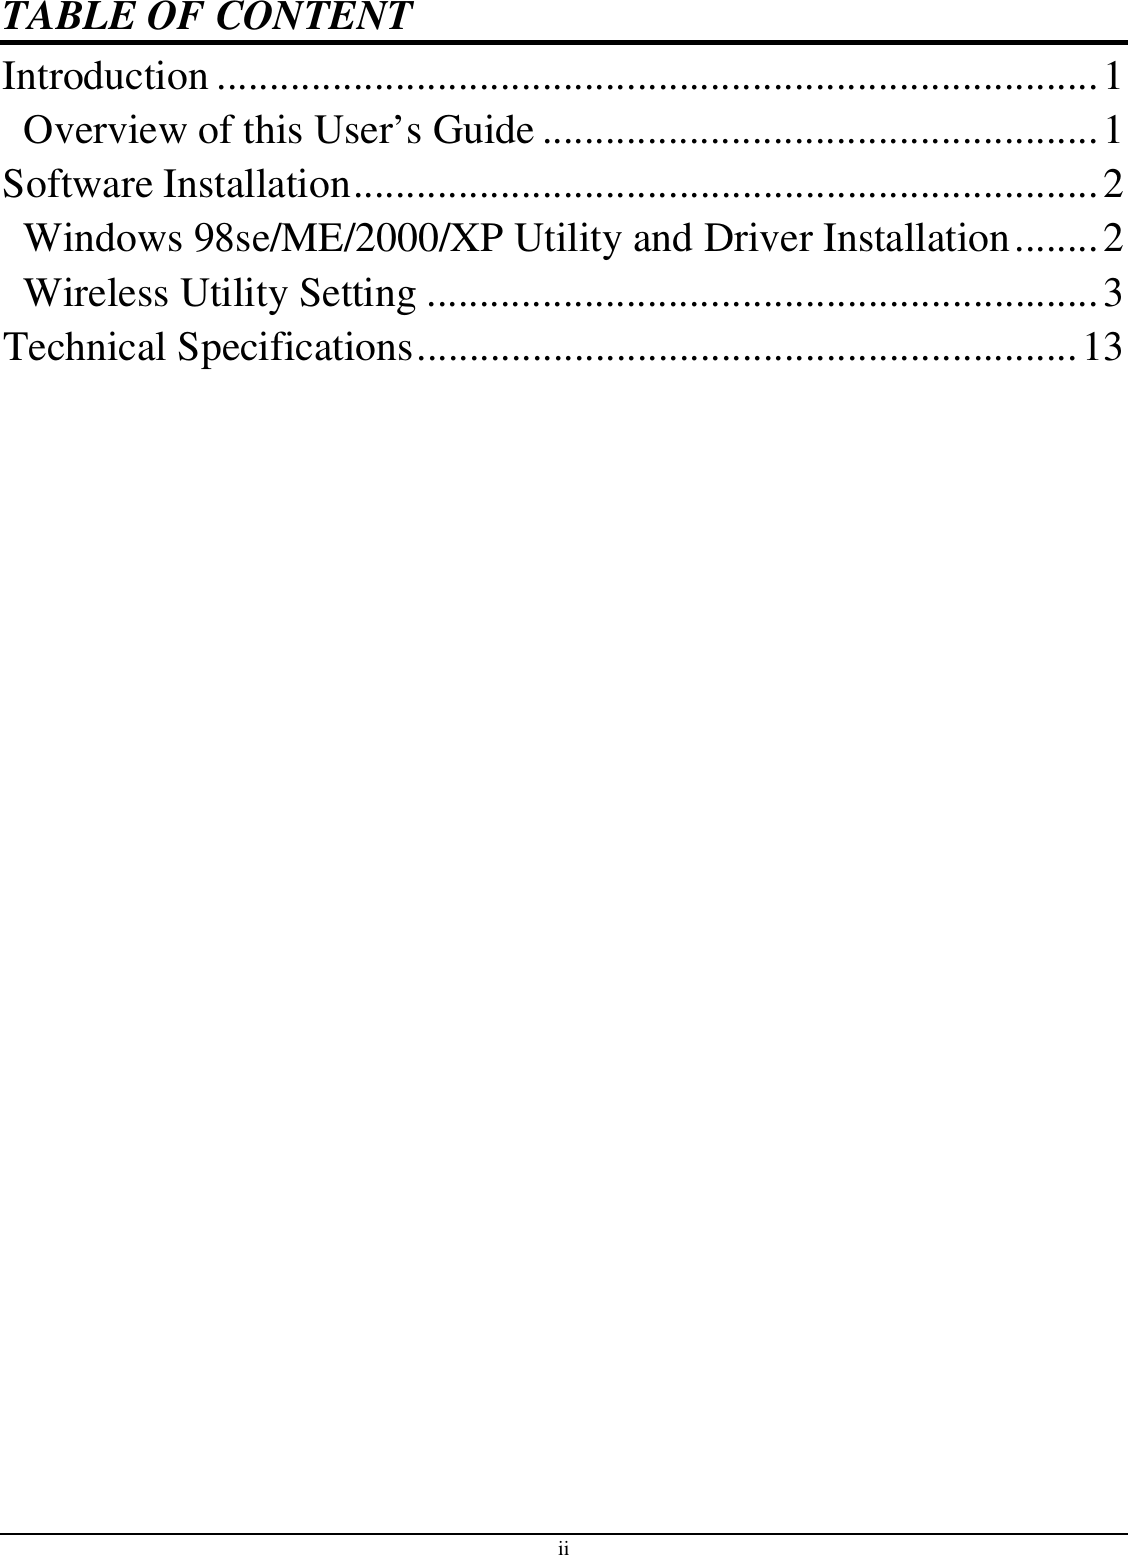 ii TABLE OF CONTENT Introduction ....................................................................................1 Overview of this User’s Guide .....................................................1 Software Installation.......................................................................2 Windows 98se/ME/2000/XP Utility and Driver Installation........2 Wireless Utility Setting ................................................................3 Technical Specifications...............................................................13  